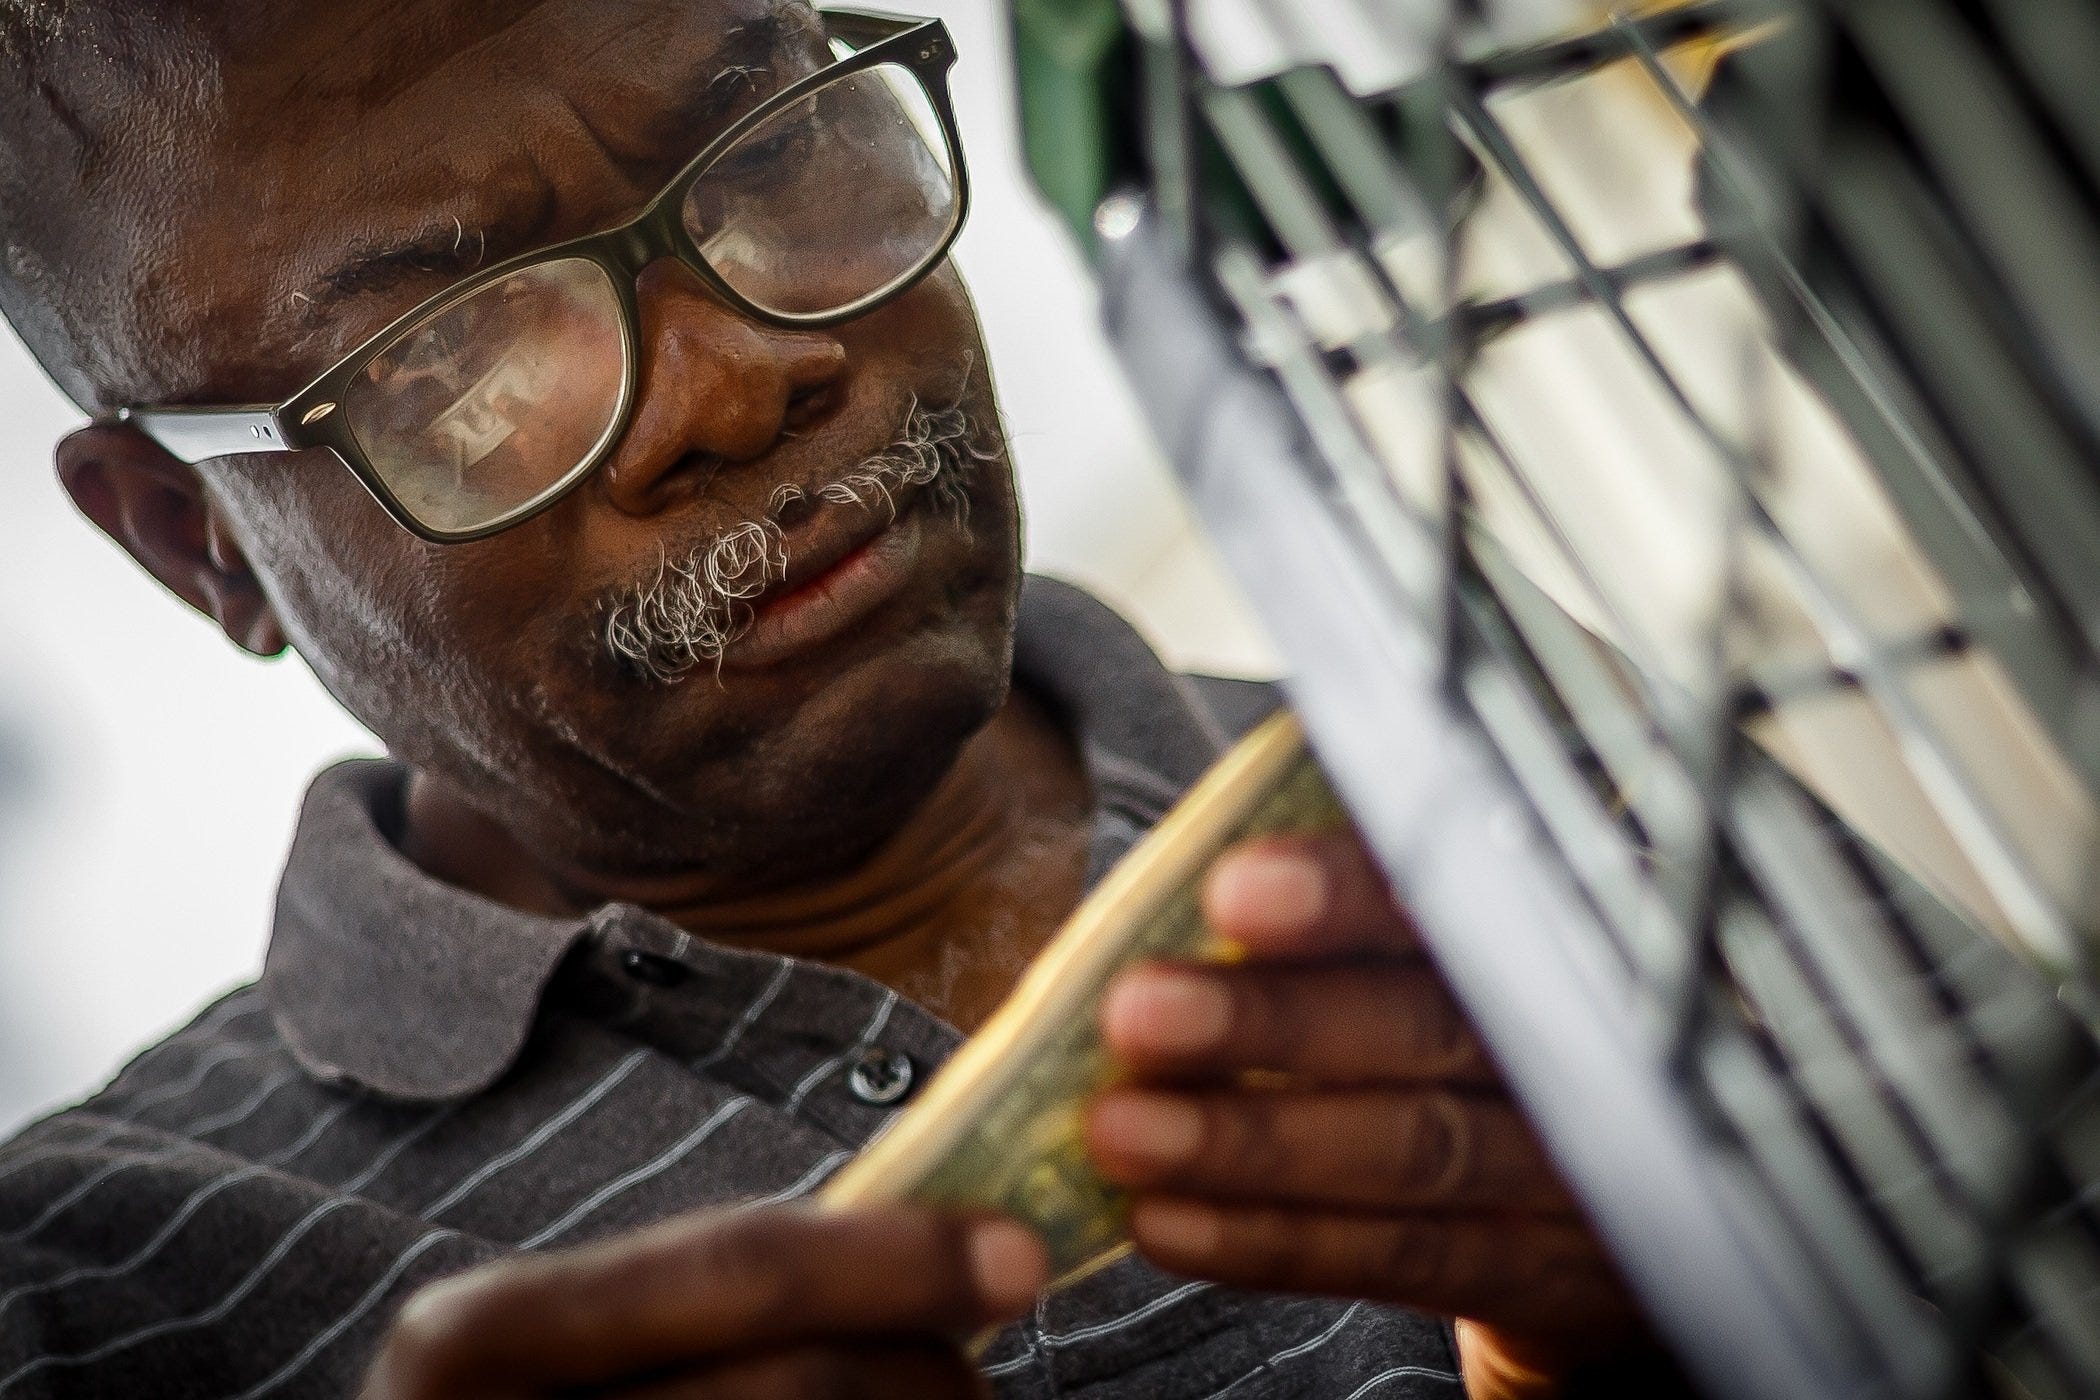 Degraff Jean methodically checks his currency to ensure he is giving the correct bills to a PalmTran driver before he is picked up at a local supermarket in West Palm Beach. DeGraff is losing his eyesight due to glaucoma.